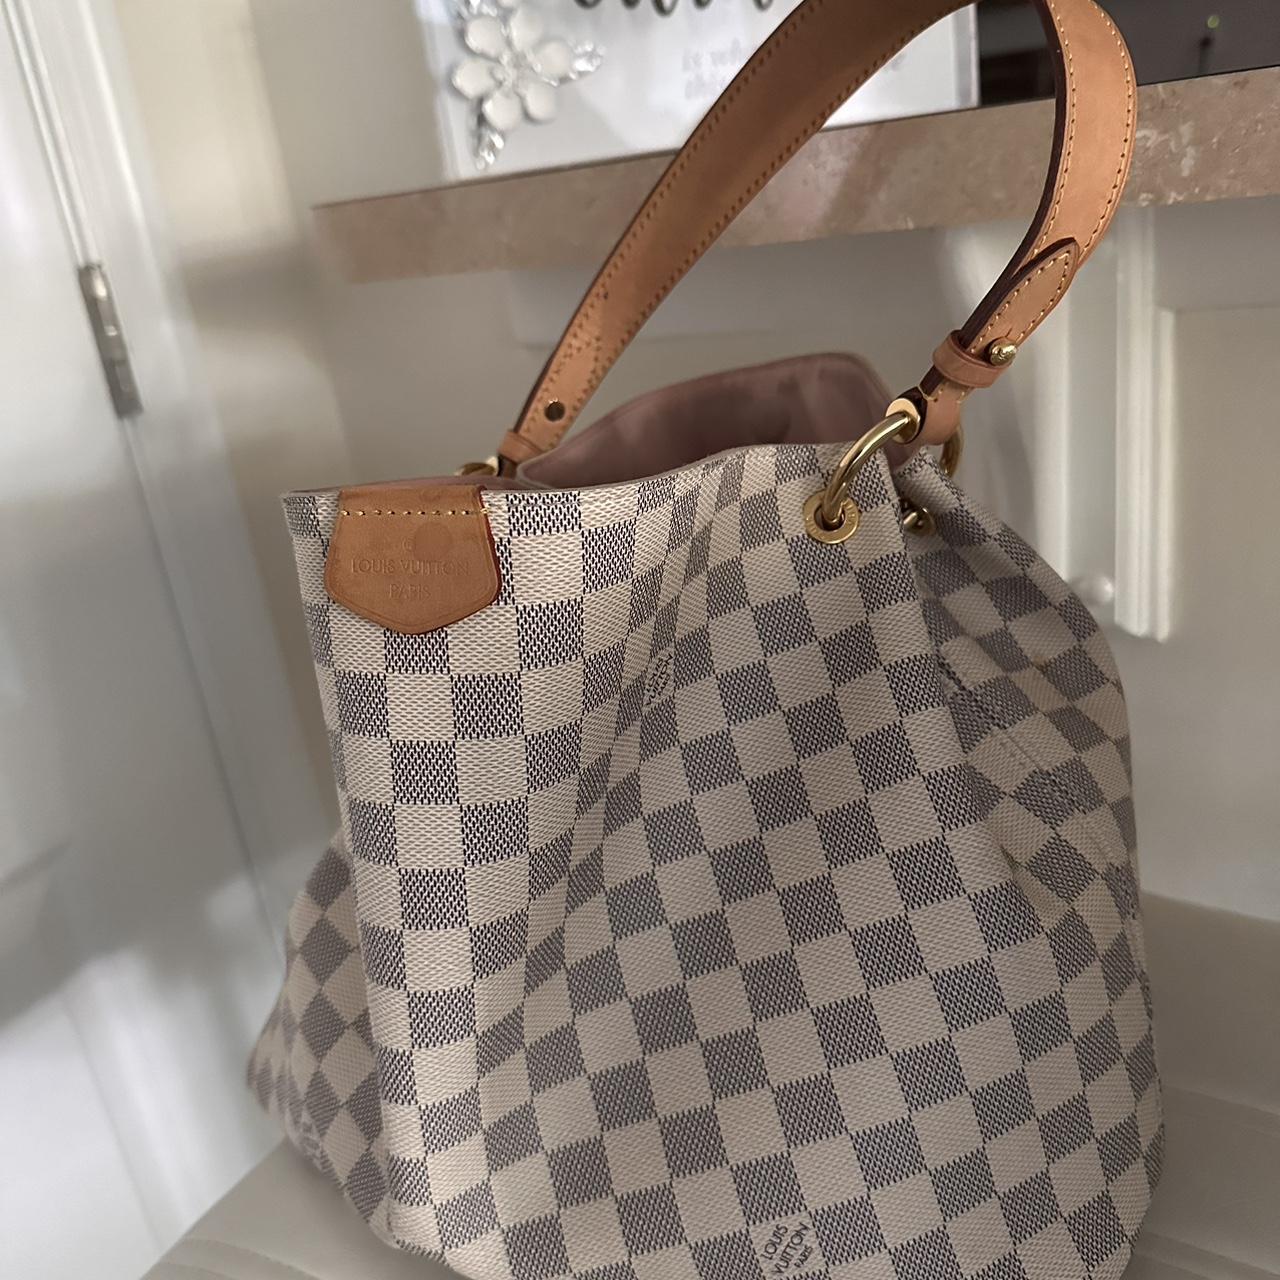 louis vuitton pm graceful & charm. $100 off without